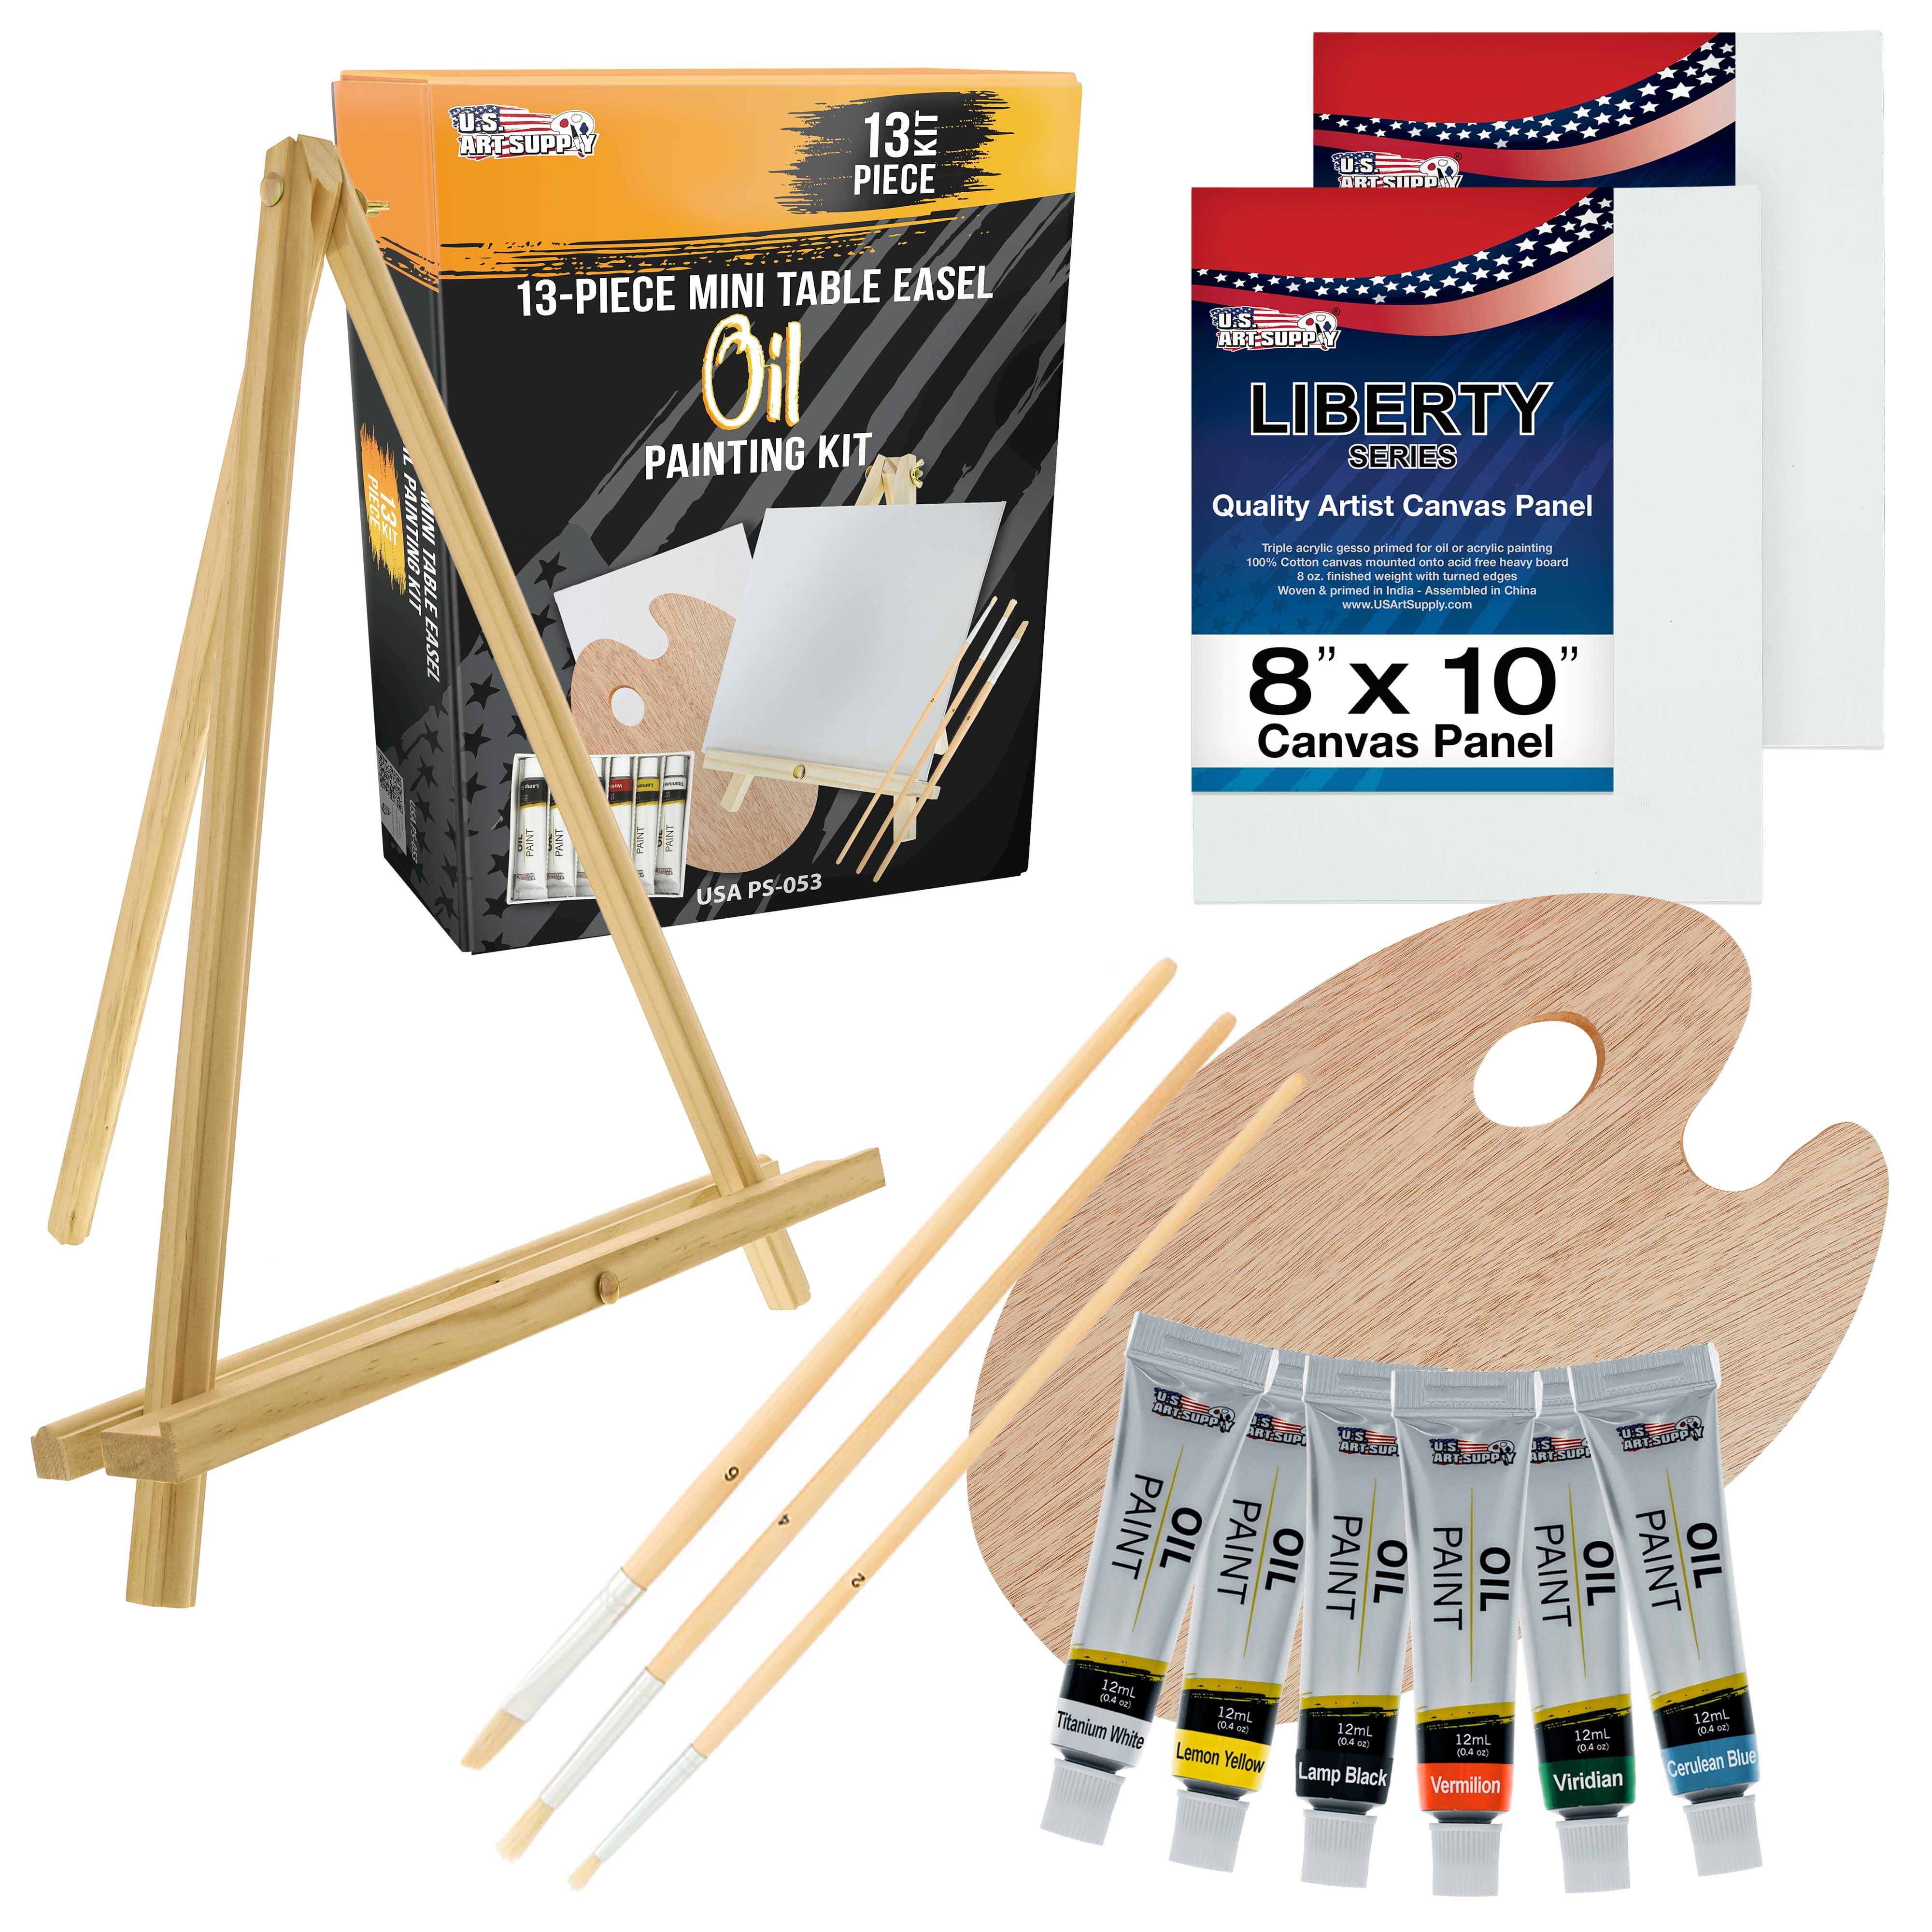 Paint & Brushes Children's Rock & Tile Painting Set with Stickers Full kit 